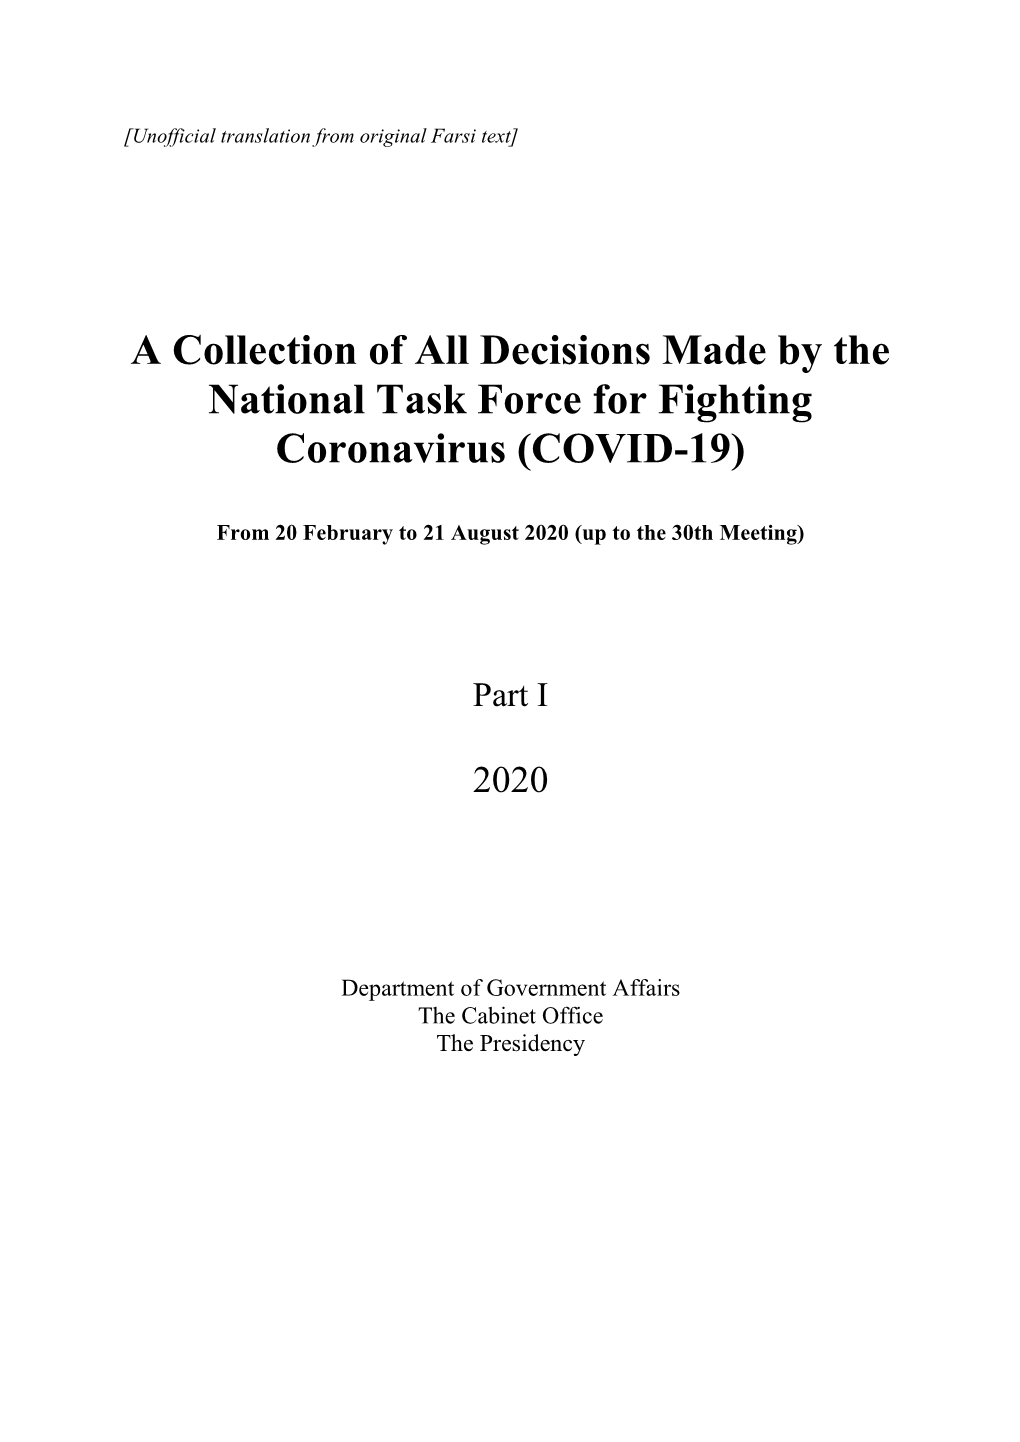 A Collection of All Decisions Made by the National Task Force for Fighting Coronavirus (COVID-19)